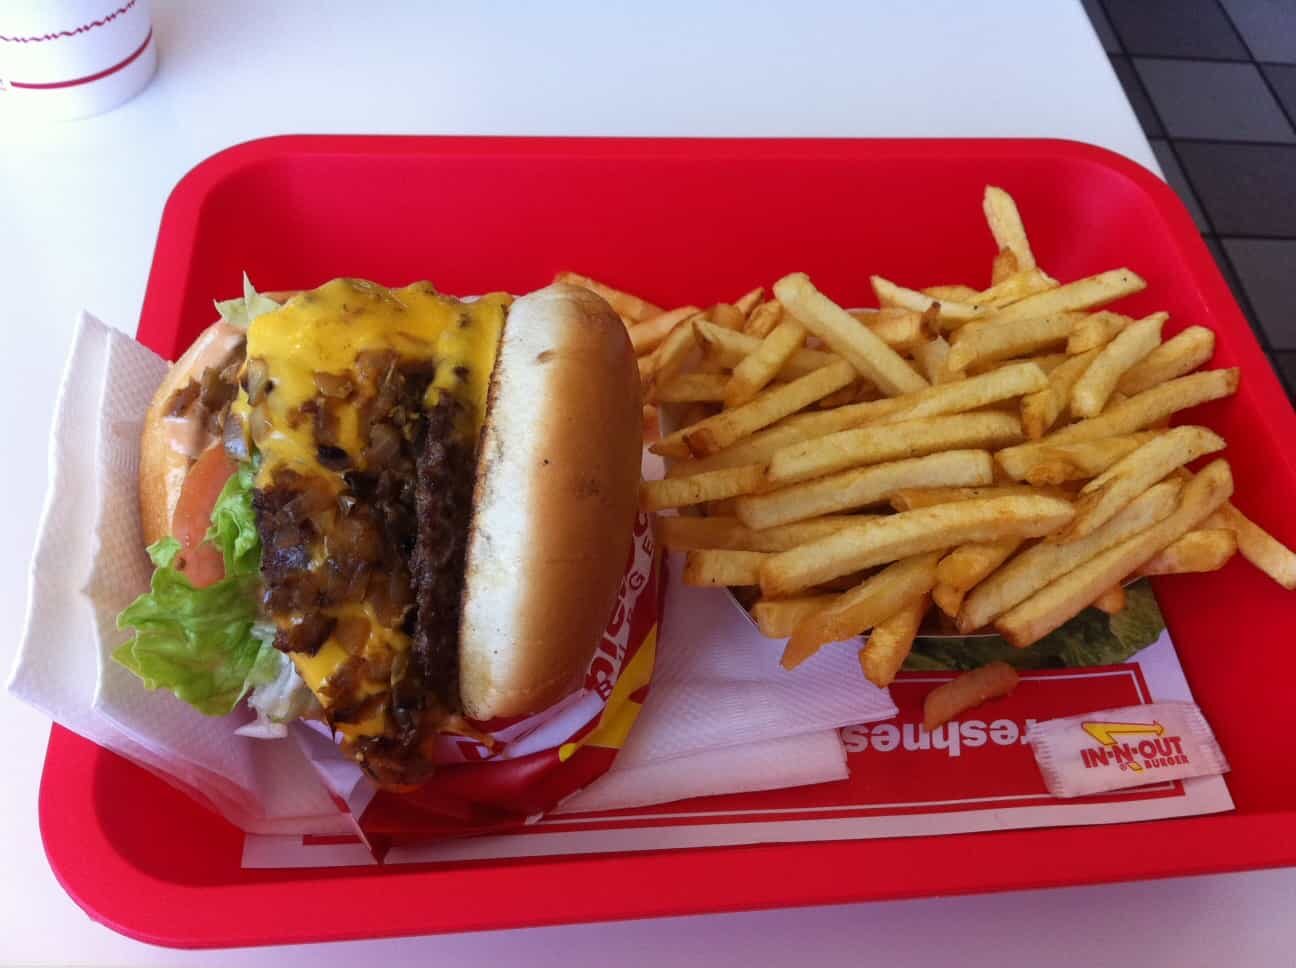 in-n-out double double animal style with fries well done